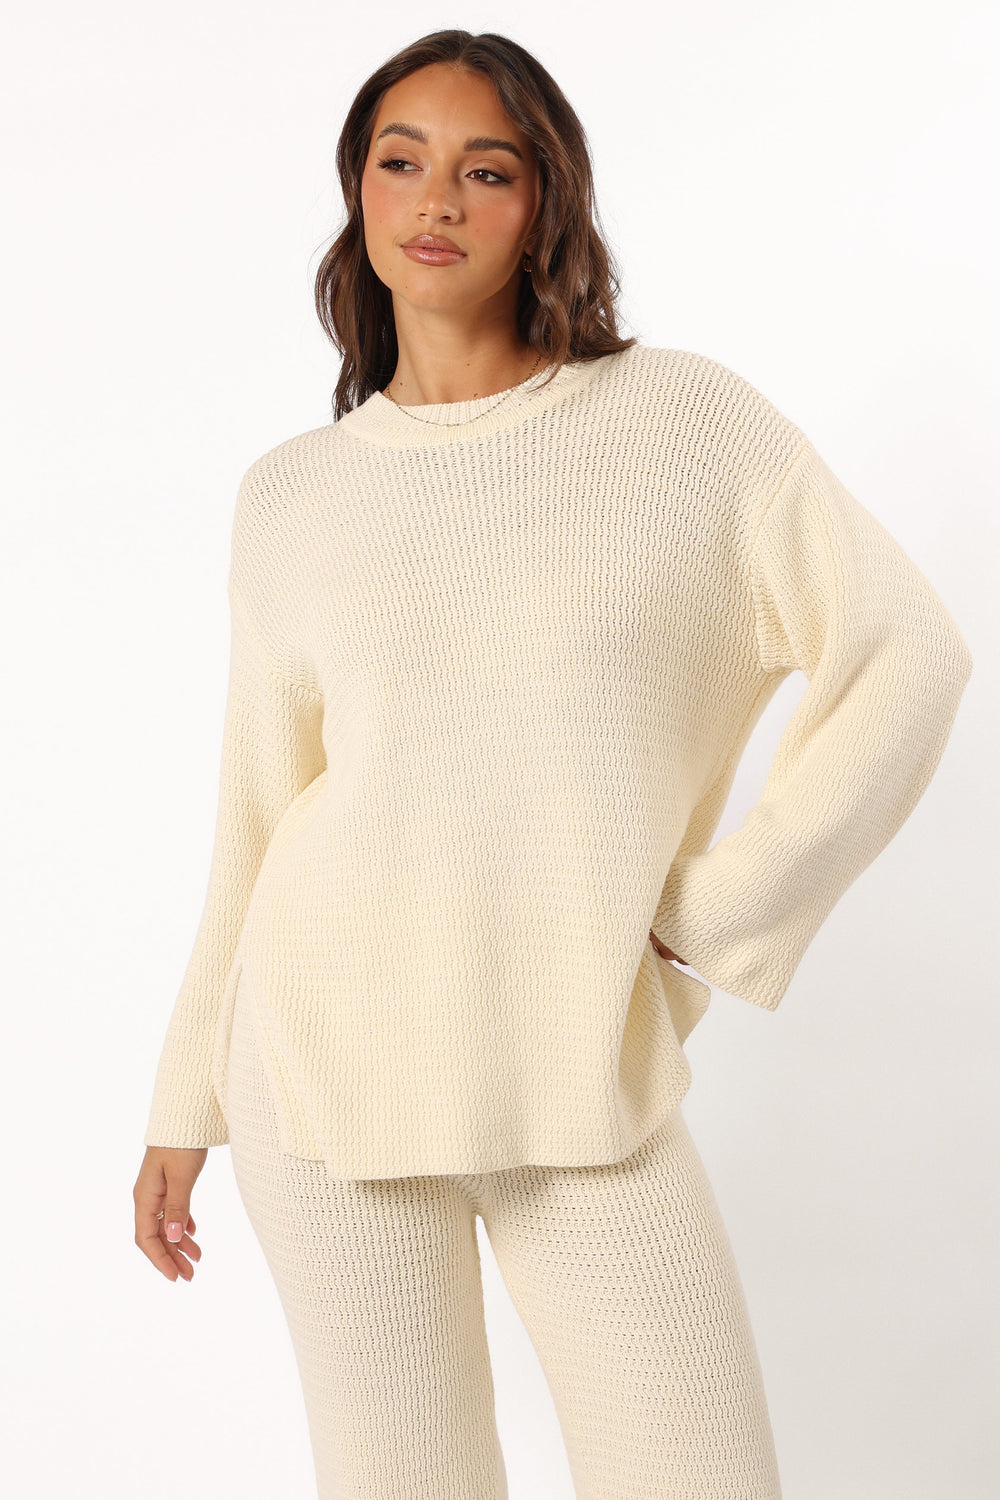 TOPS @Mckinley Sweater - Cream (Hold for Cool Beginnings)